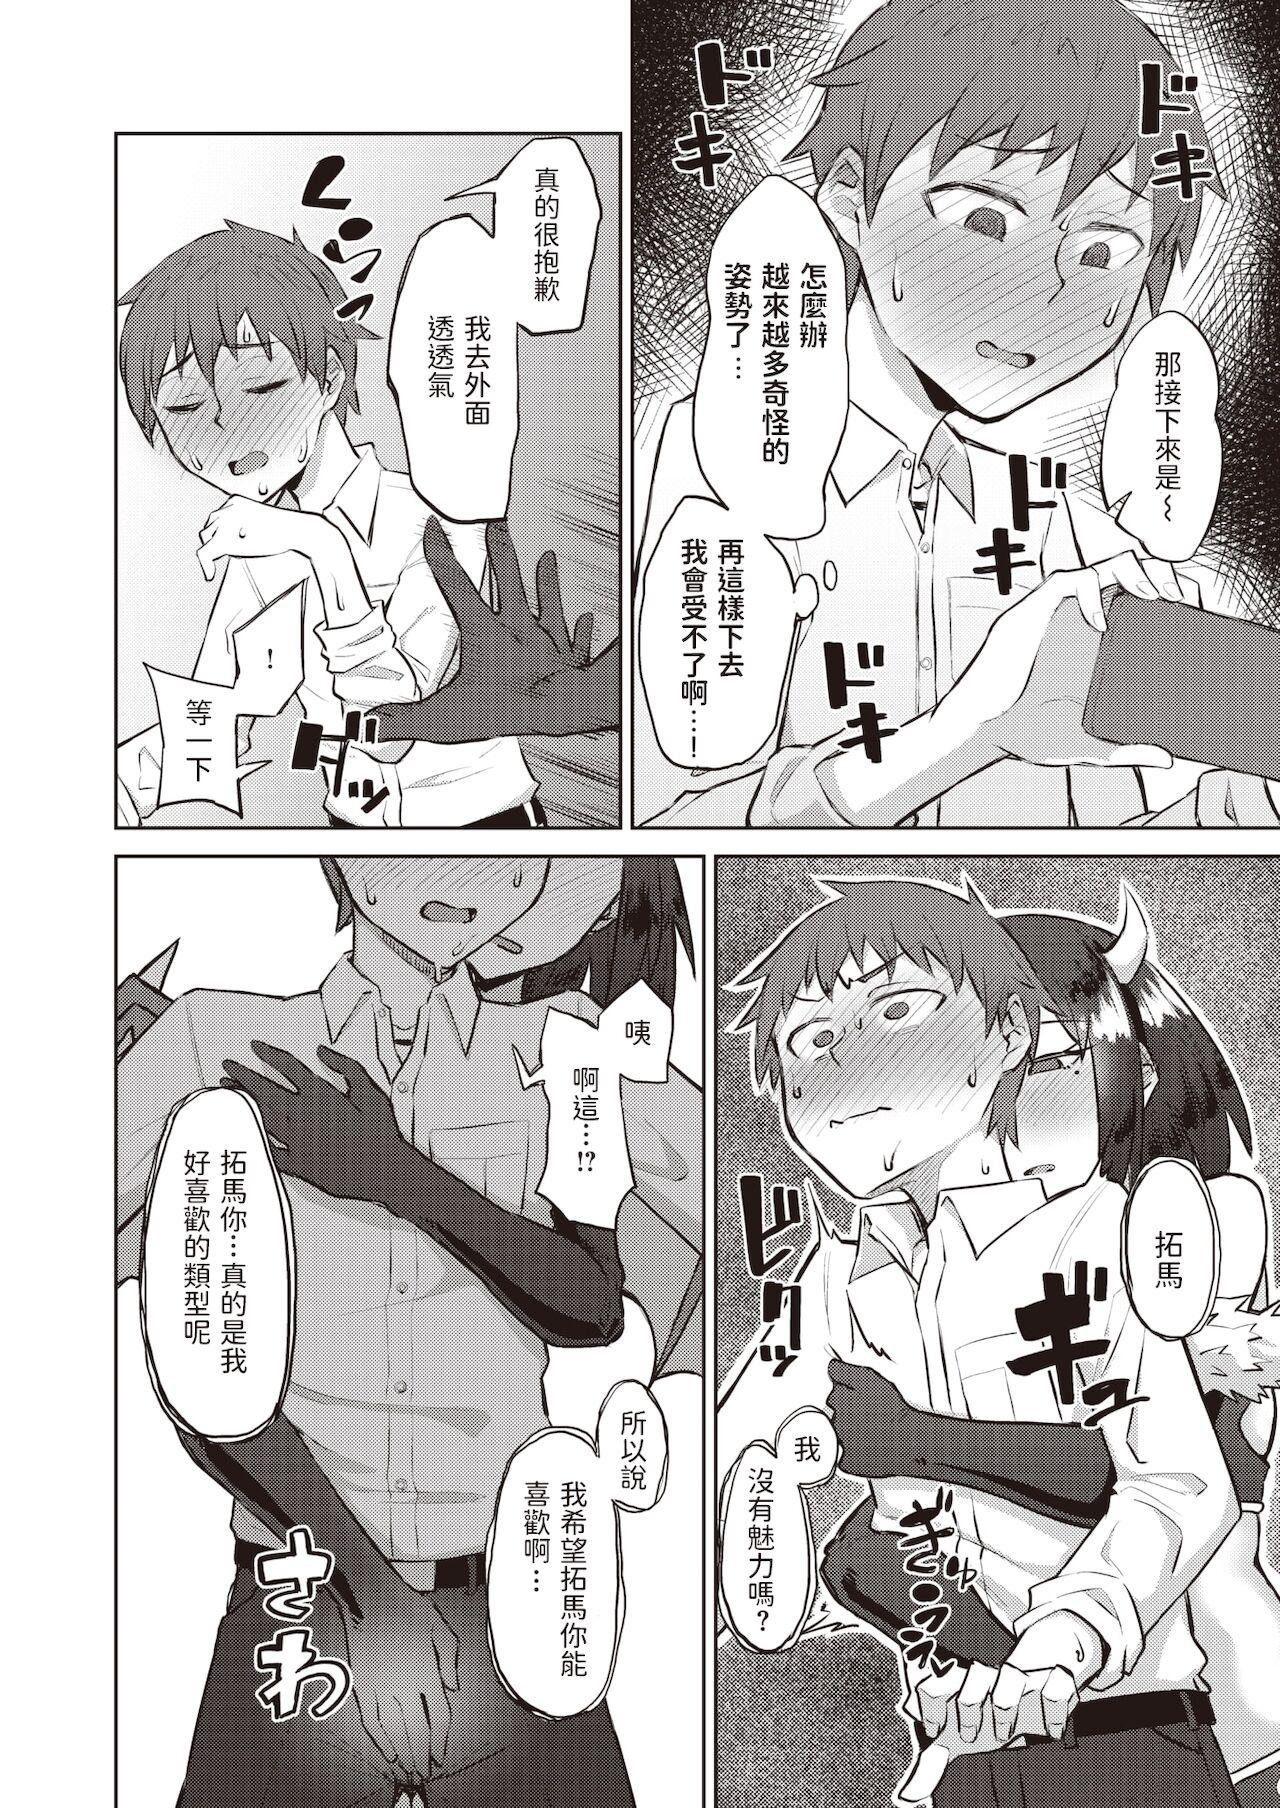 Foreplay [悪天候] るっくあっとみー (COMIC 失楽天 2019年12月号) 中文翻譯 Twink - Page 10